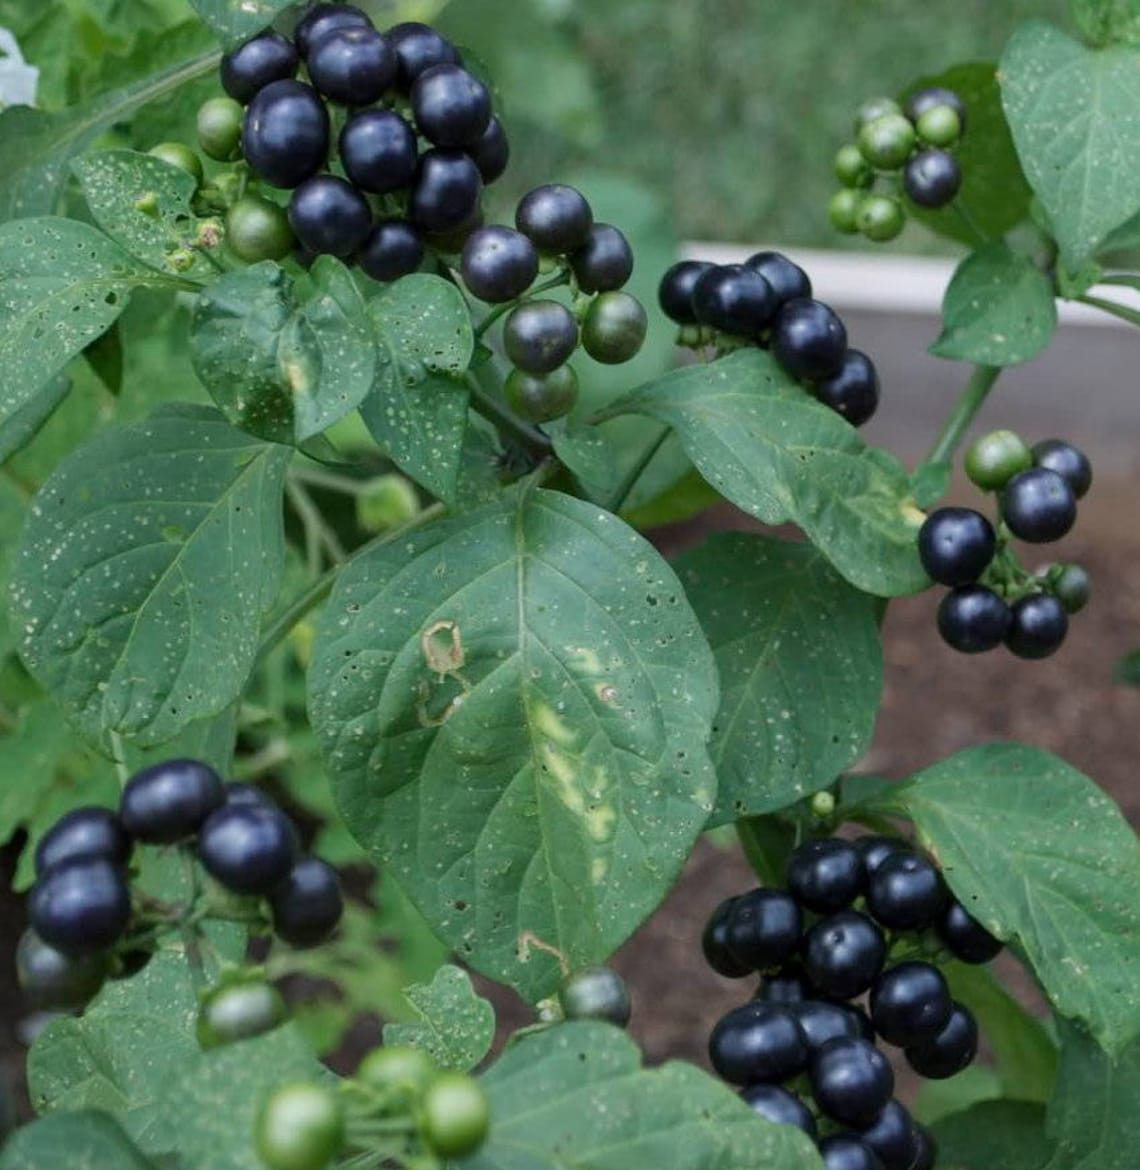 Close up of shiny black berries surrounded by some broad, flat leaves